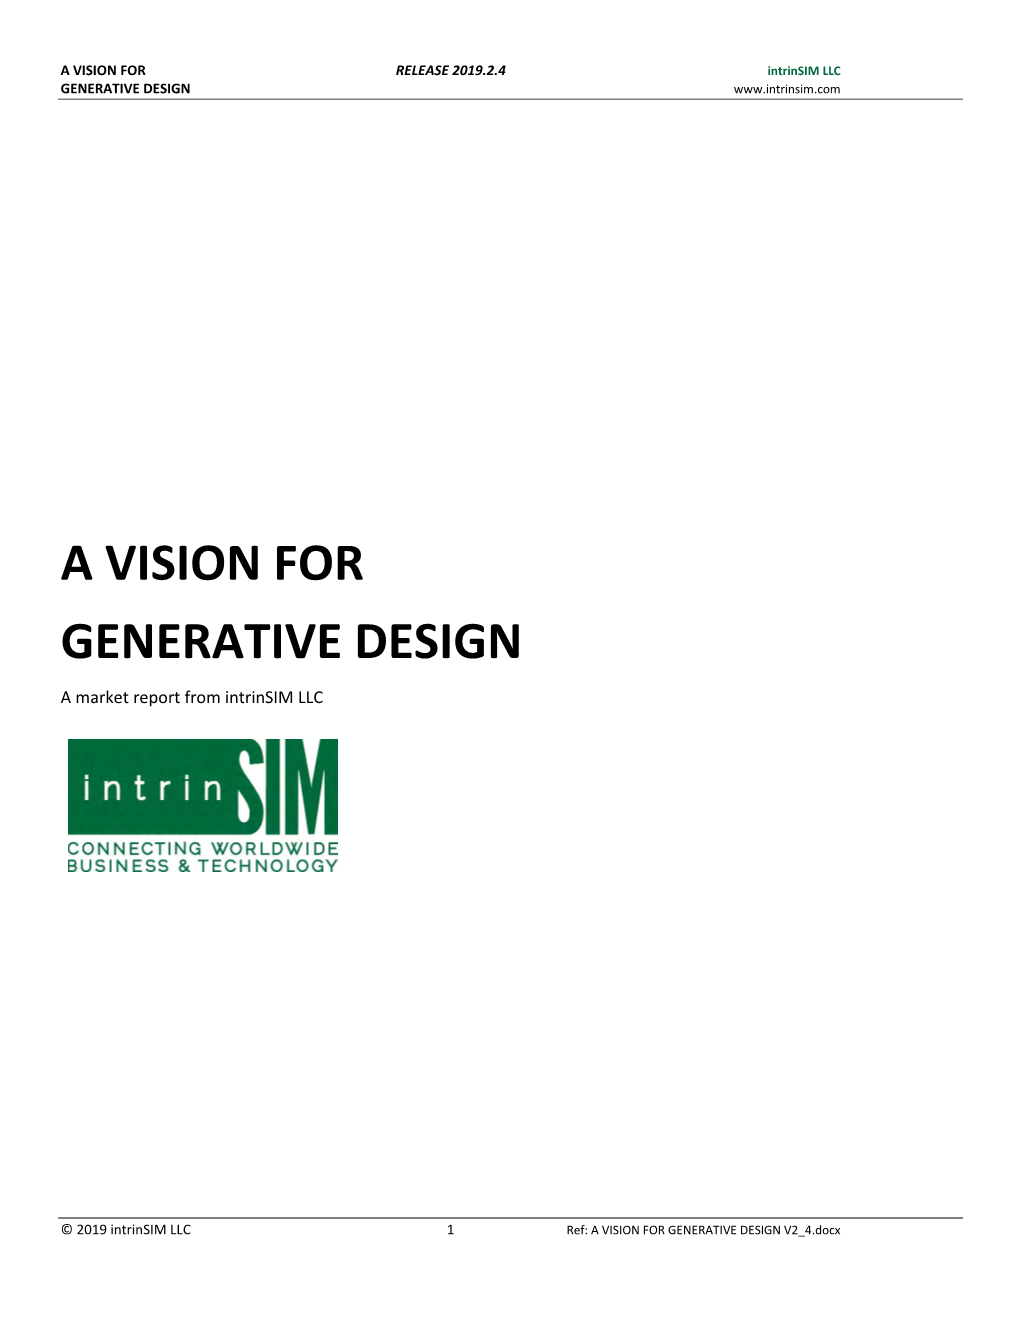 A VISION for GENERATIVE DESIGN a Market Report from Intrinsim LLC